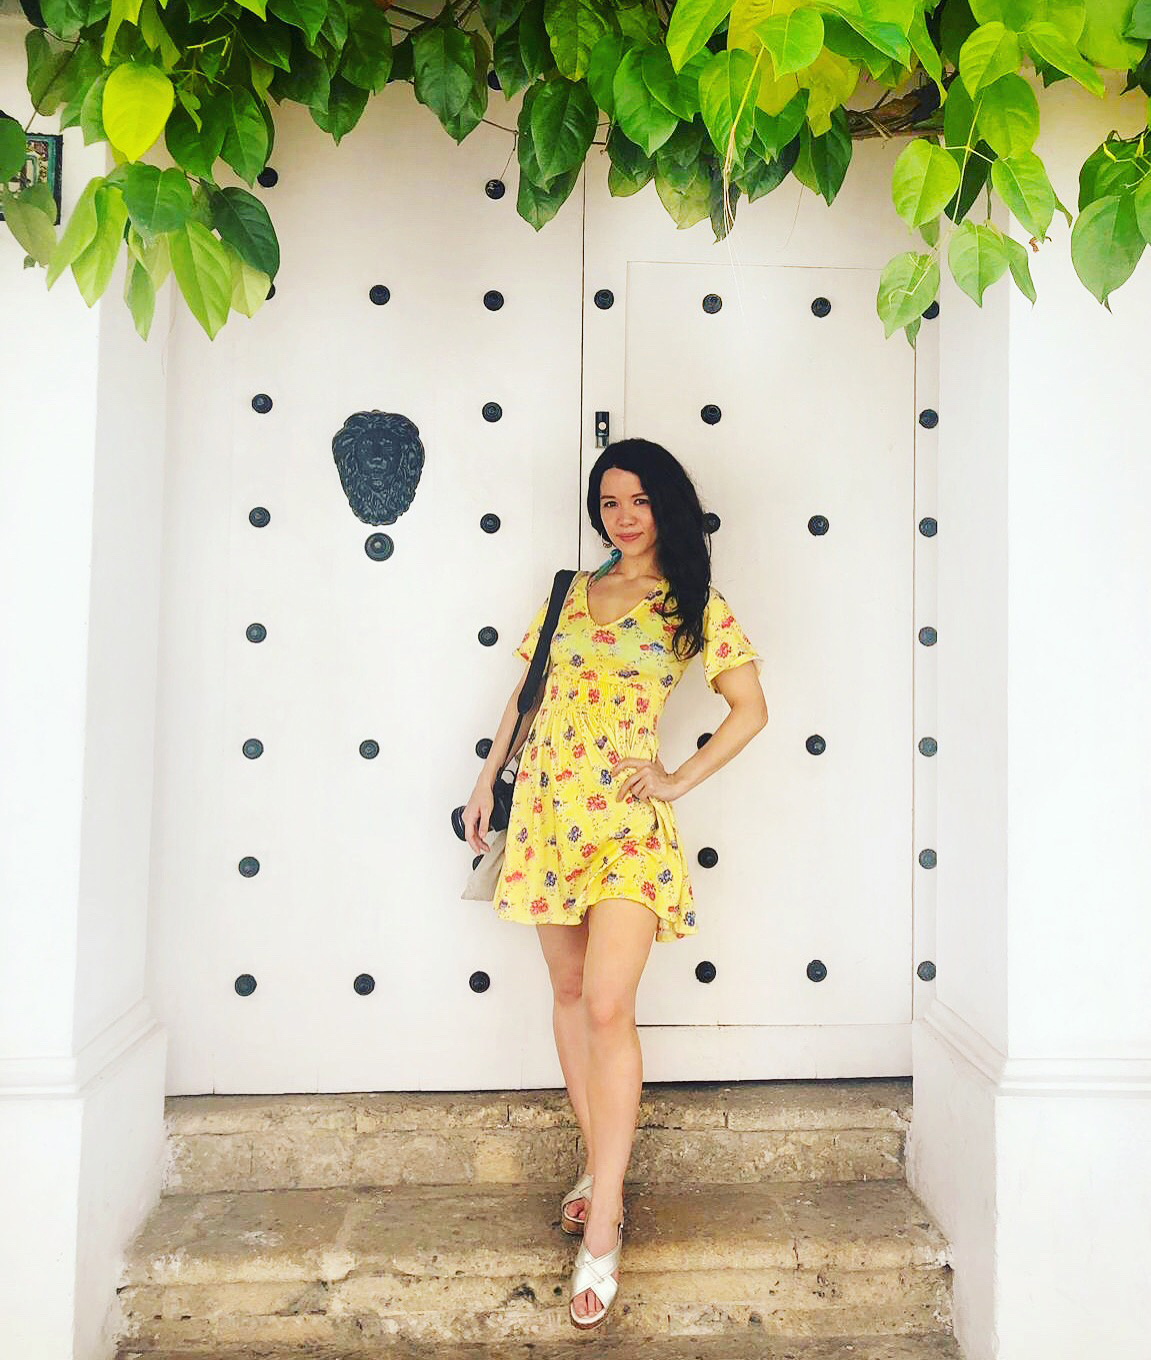 Tour of beautiful and colourful buildings and doors in Cartagena, Colombia